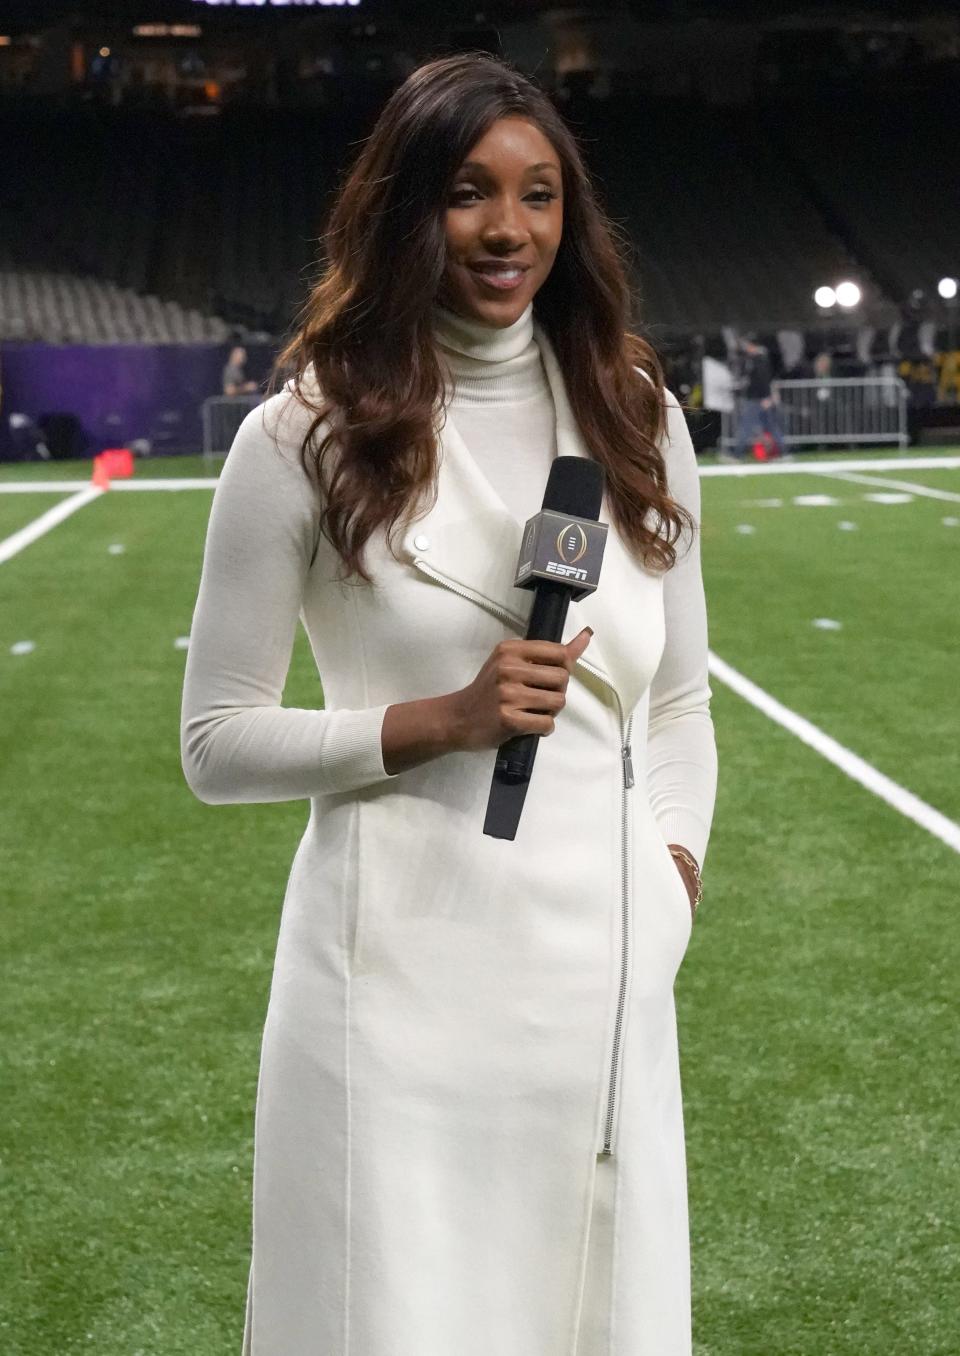 Maria Taylor before the CFP National Championship between the Clemson Tigers and the LSU Tigers at Mercedes-Benz Superdome.